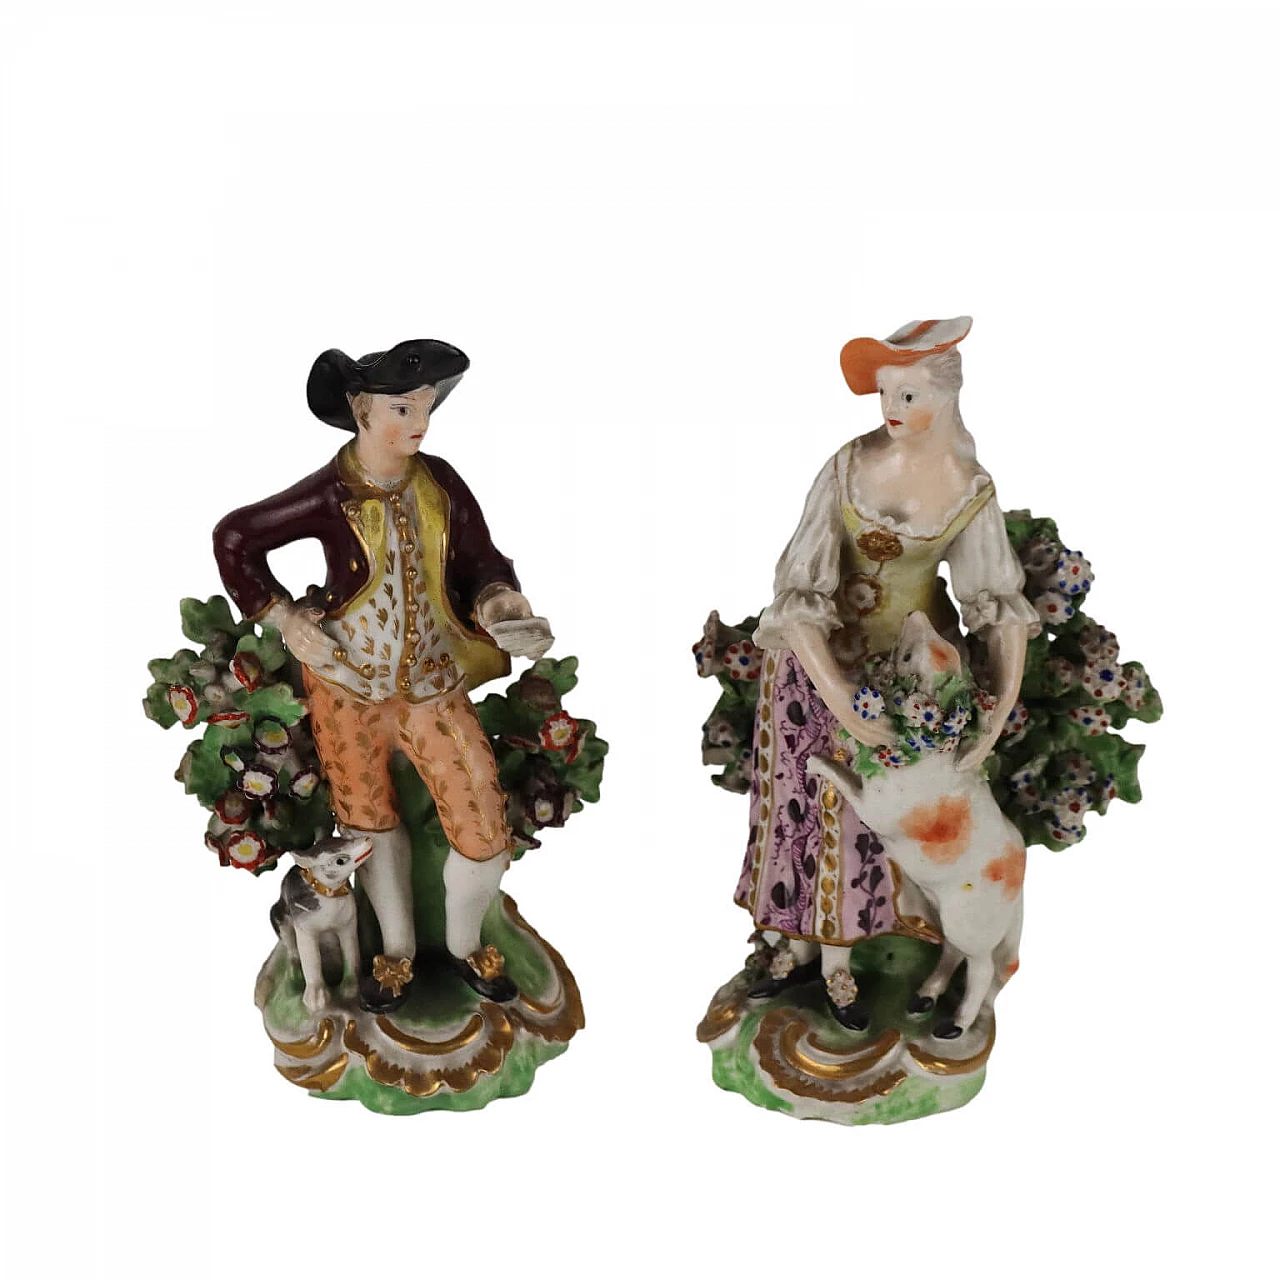 Pair of polychrome porcelain figurines, 19th century 1